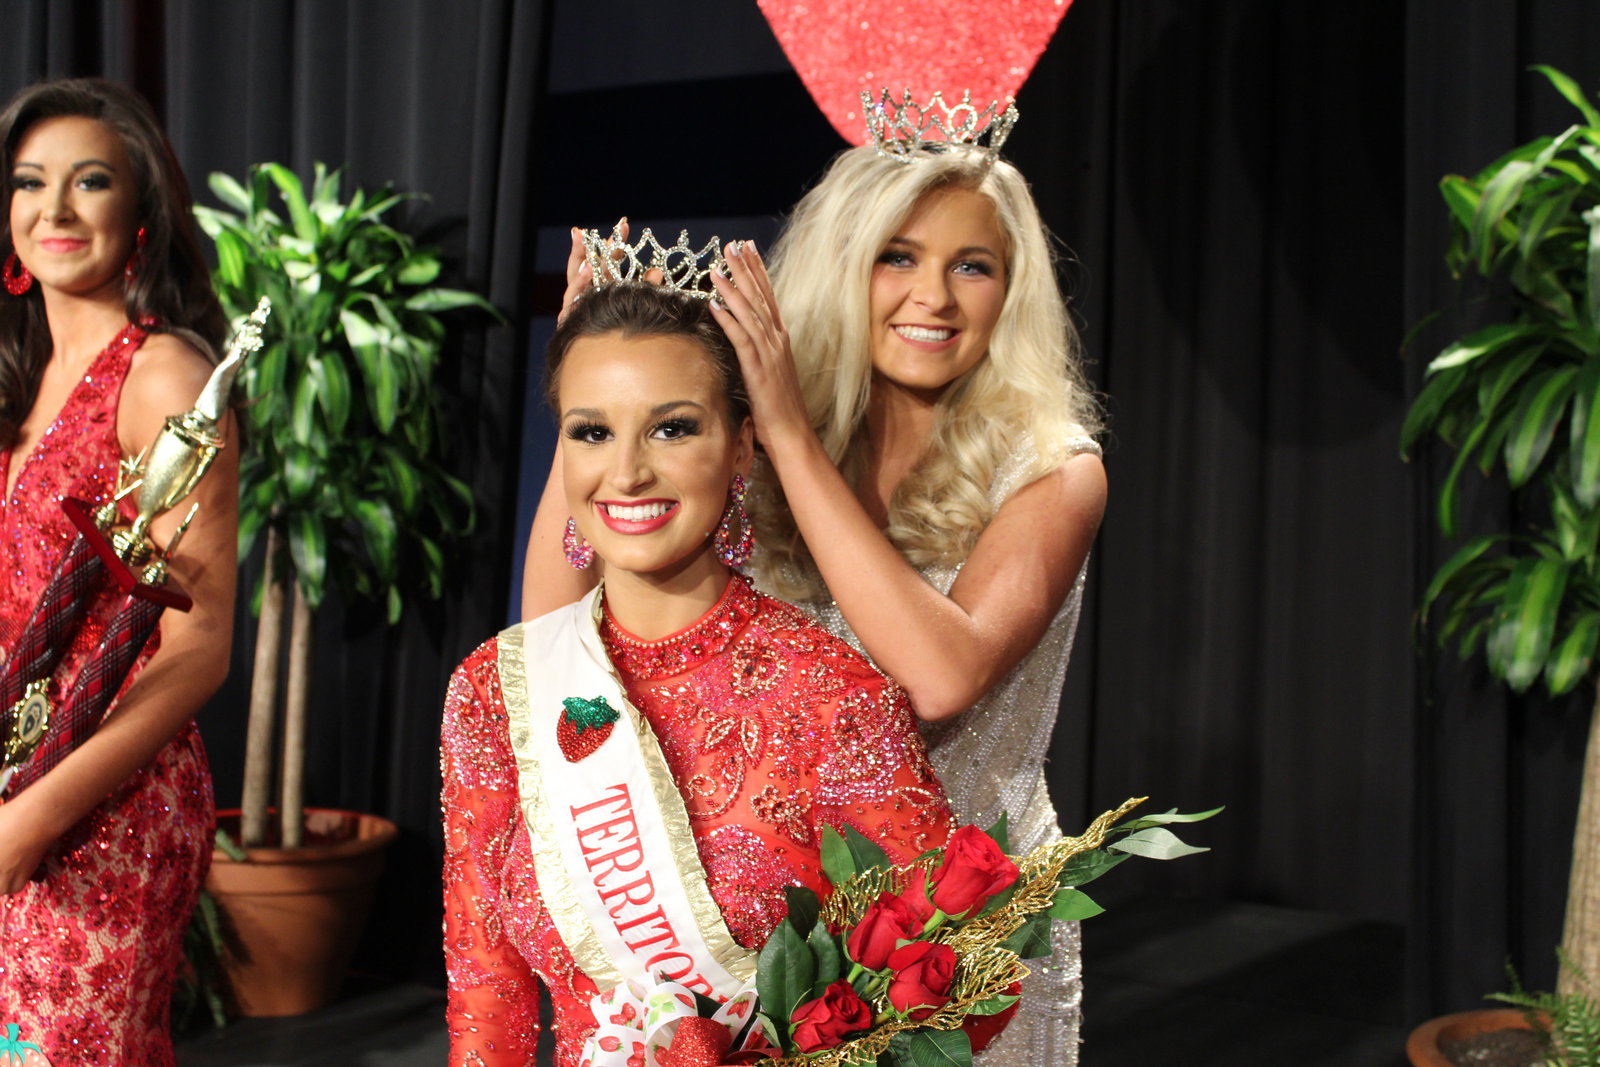 West Tennessee Strawberry Festival - Humboldt TN - Pageant - Main Terr11